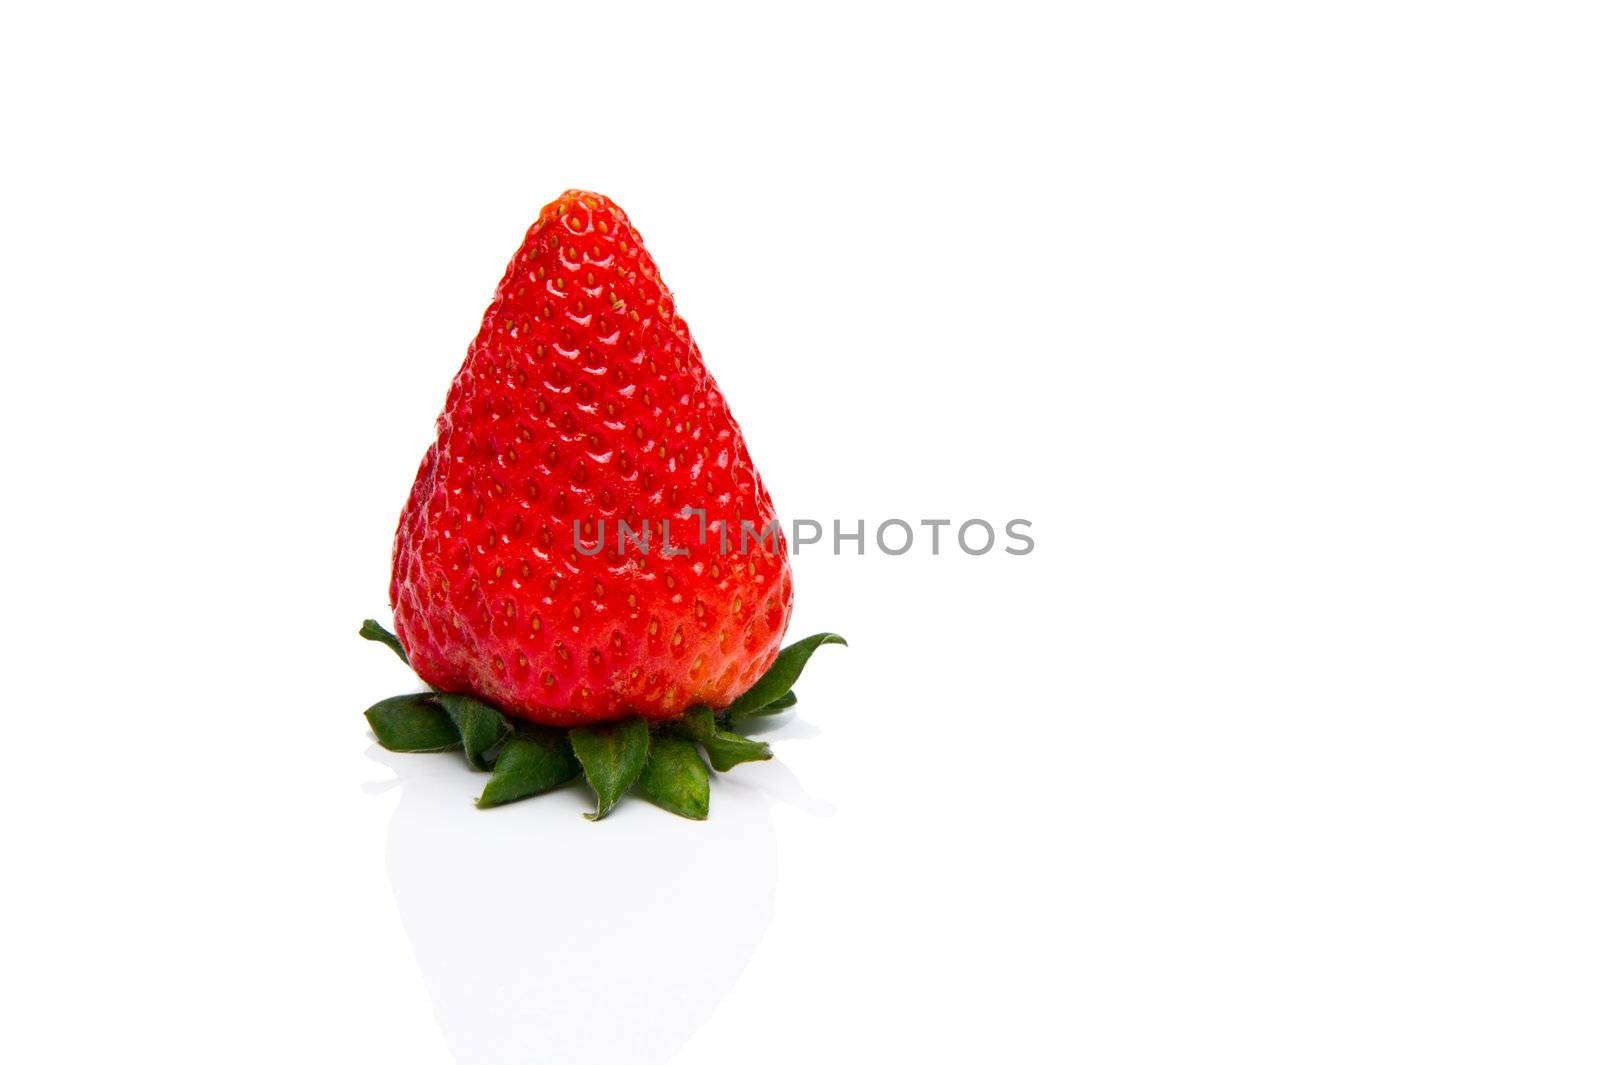 Delicious red strawberry on a white background.